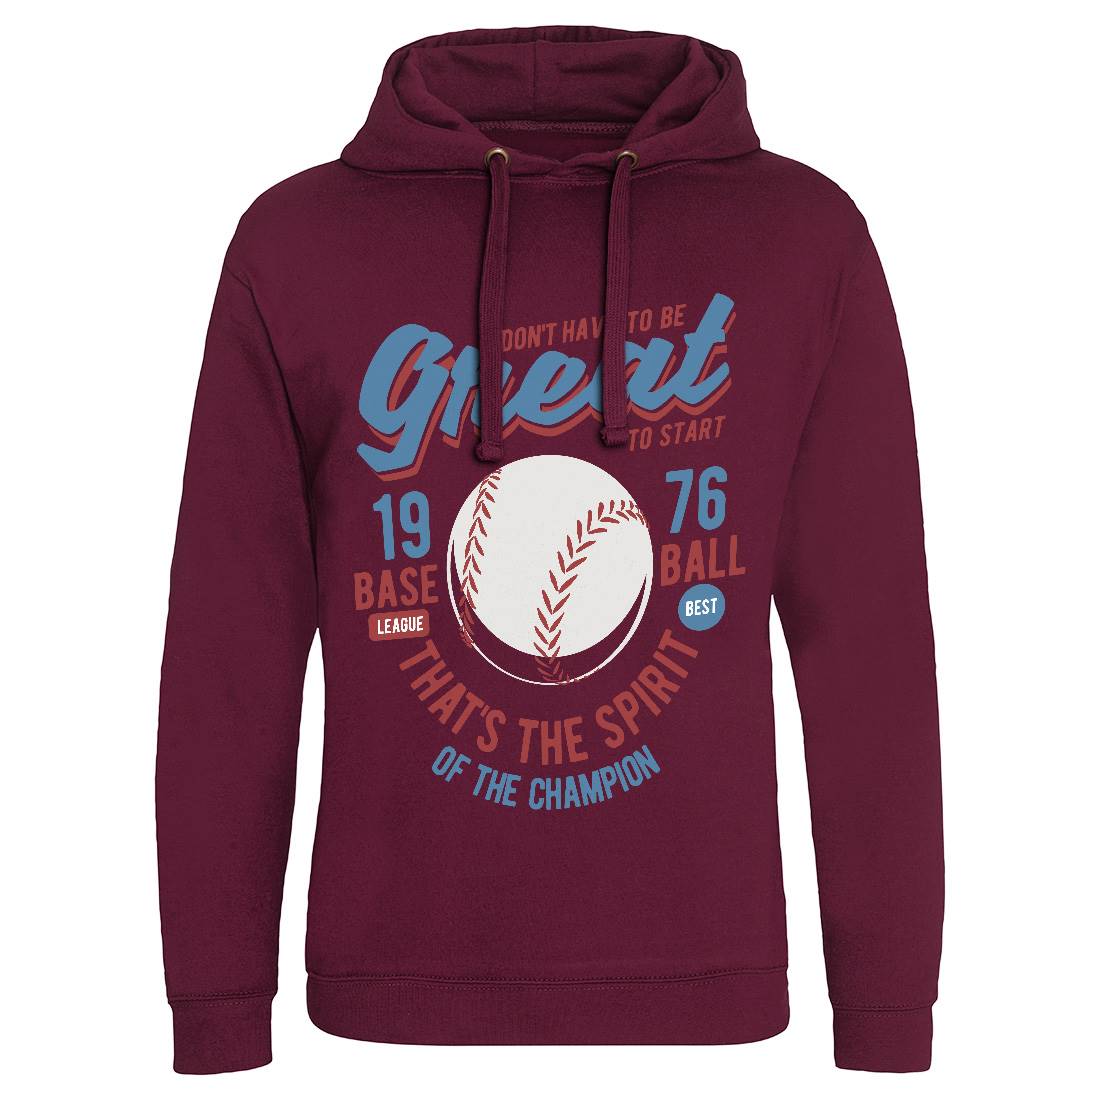 Great Baseball Mens Hoodie Without Pocket Sport B219